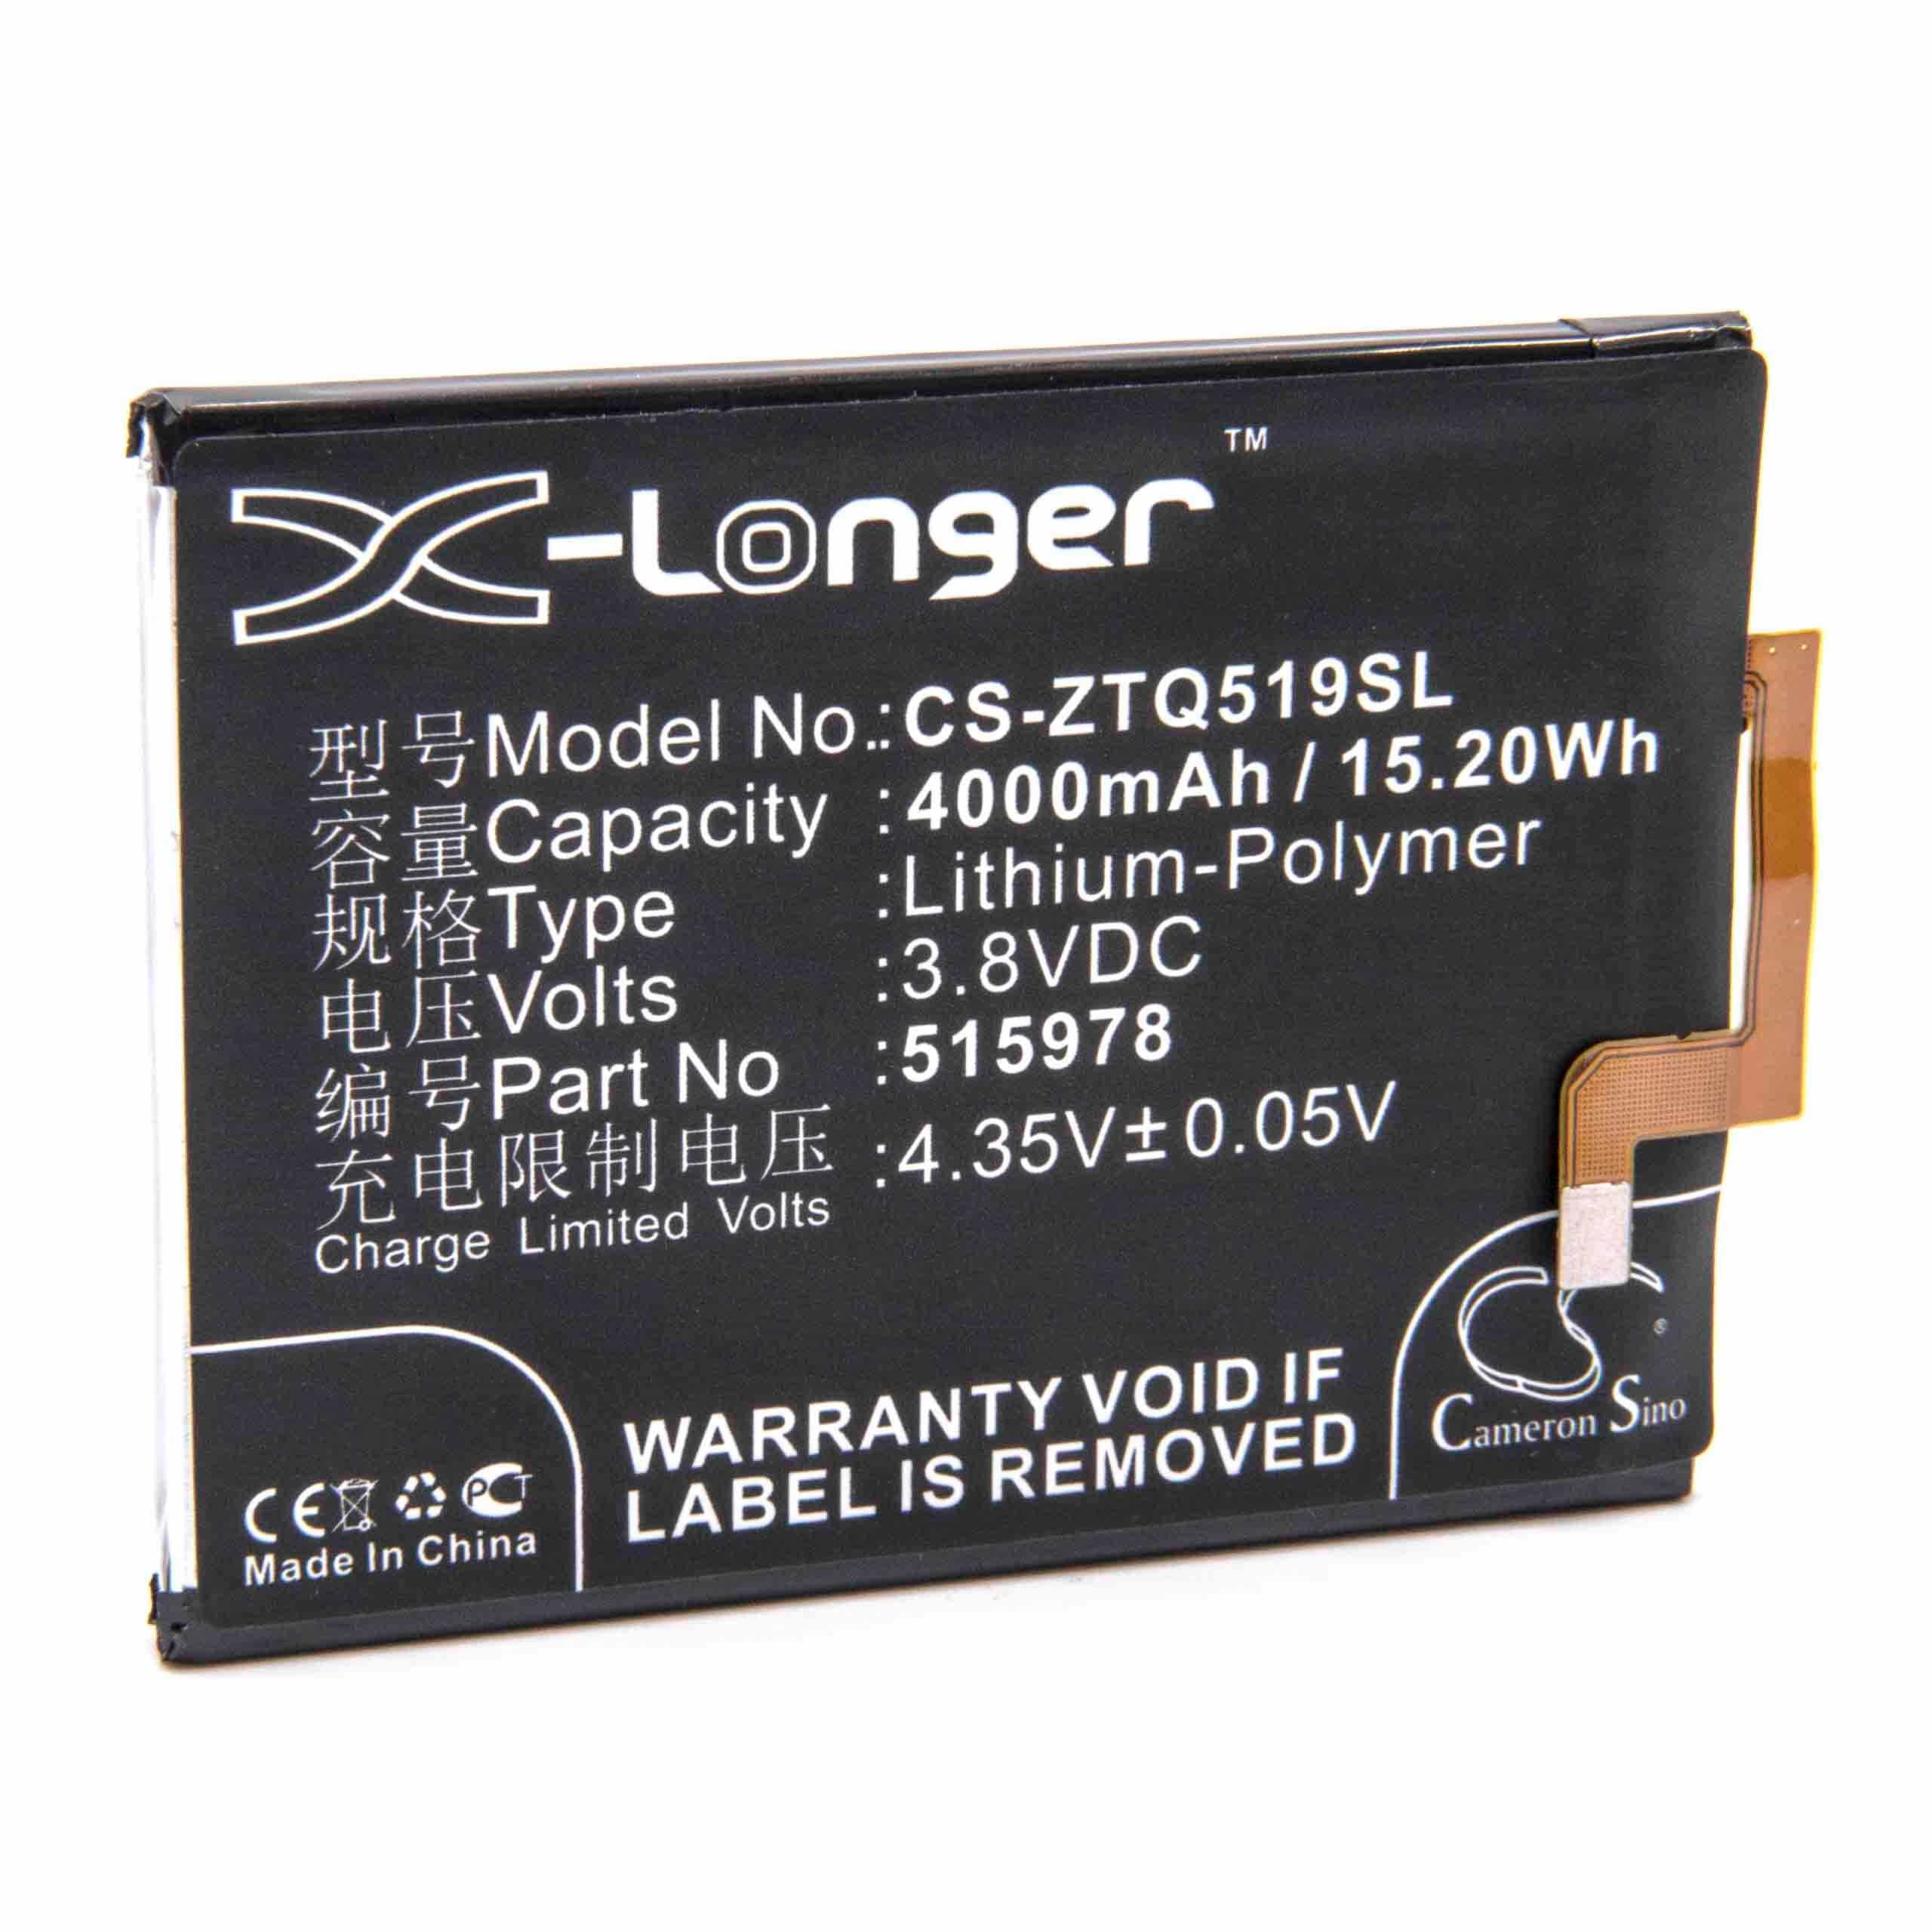 Mobile Phone Battery Replacement for ZTE E169-515978, 515978 - 4000mAh 3.8V Li-polymer